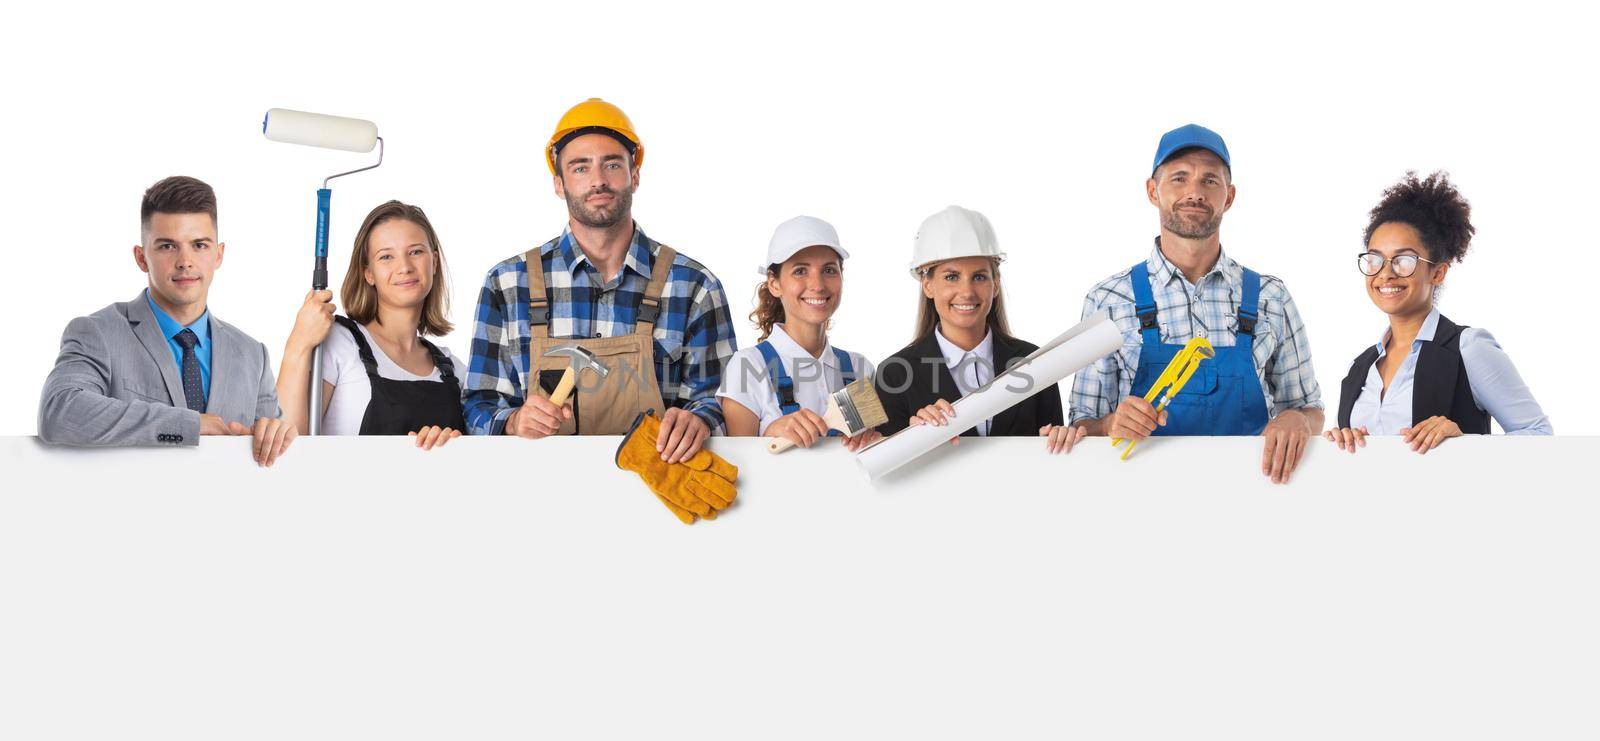 Construction workers with blank billboard by ALotOfPeople